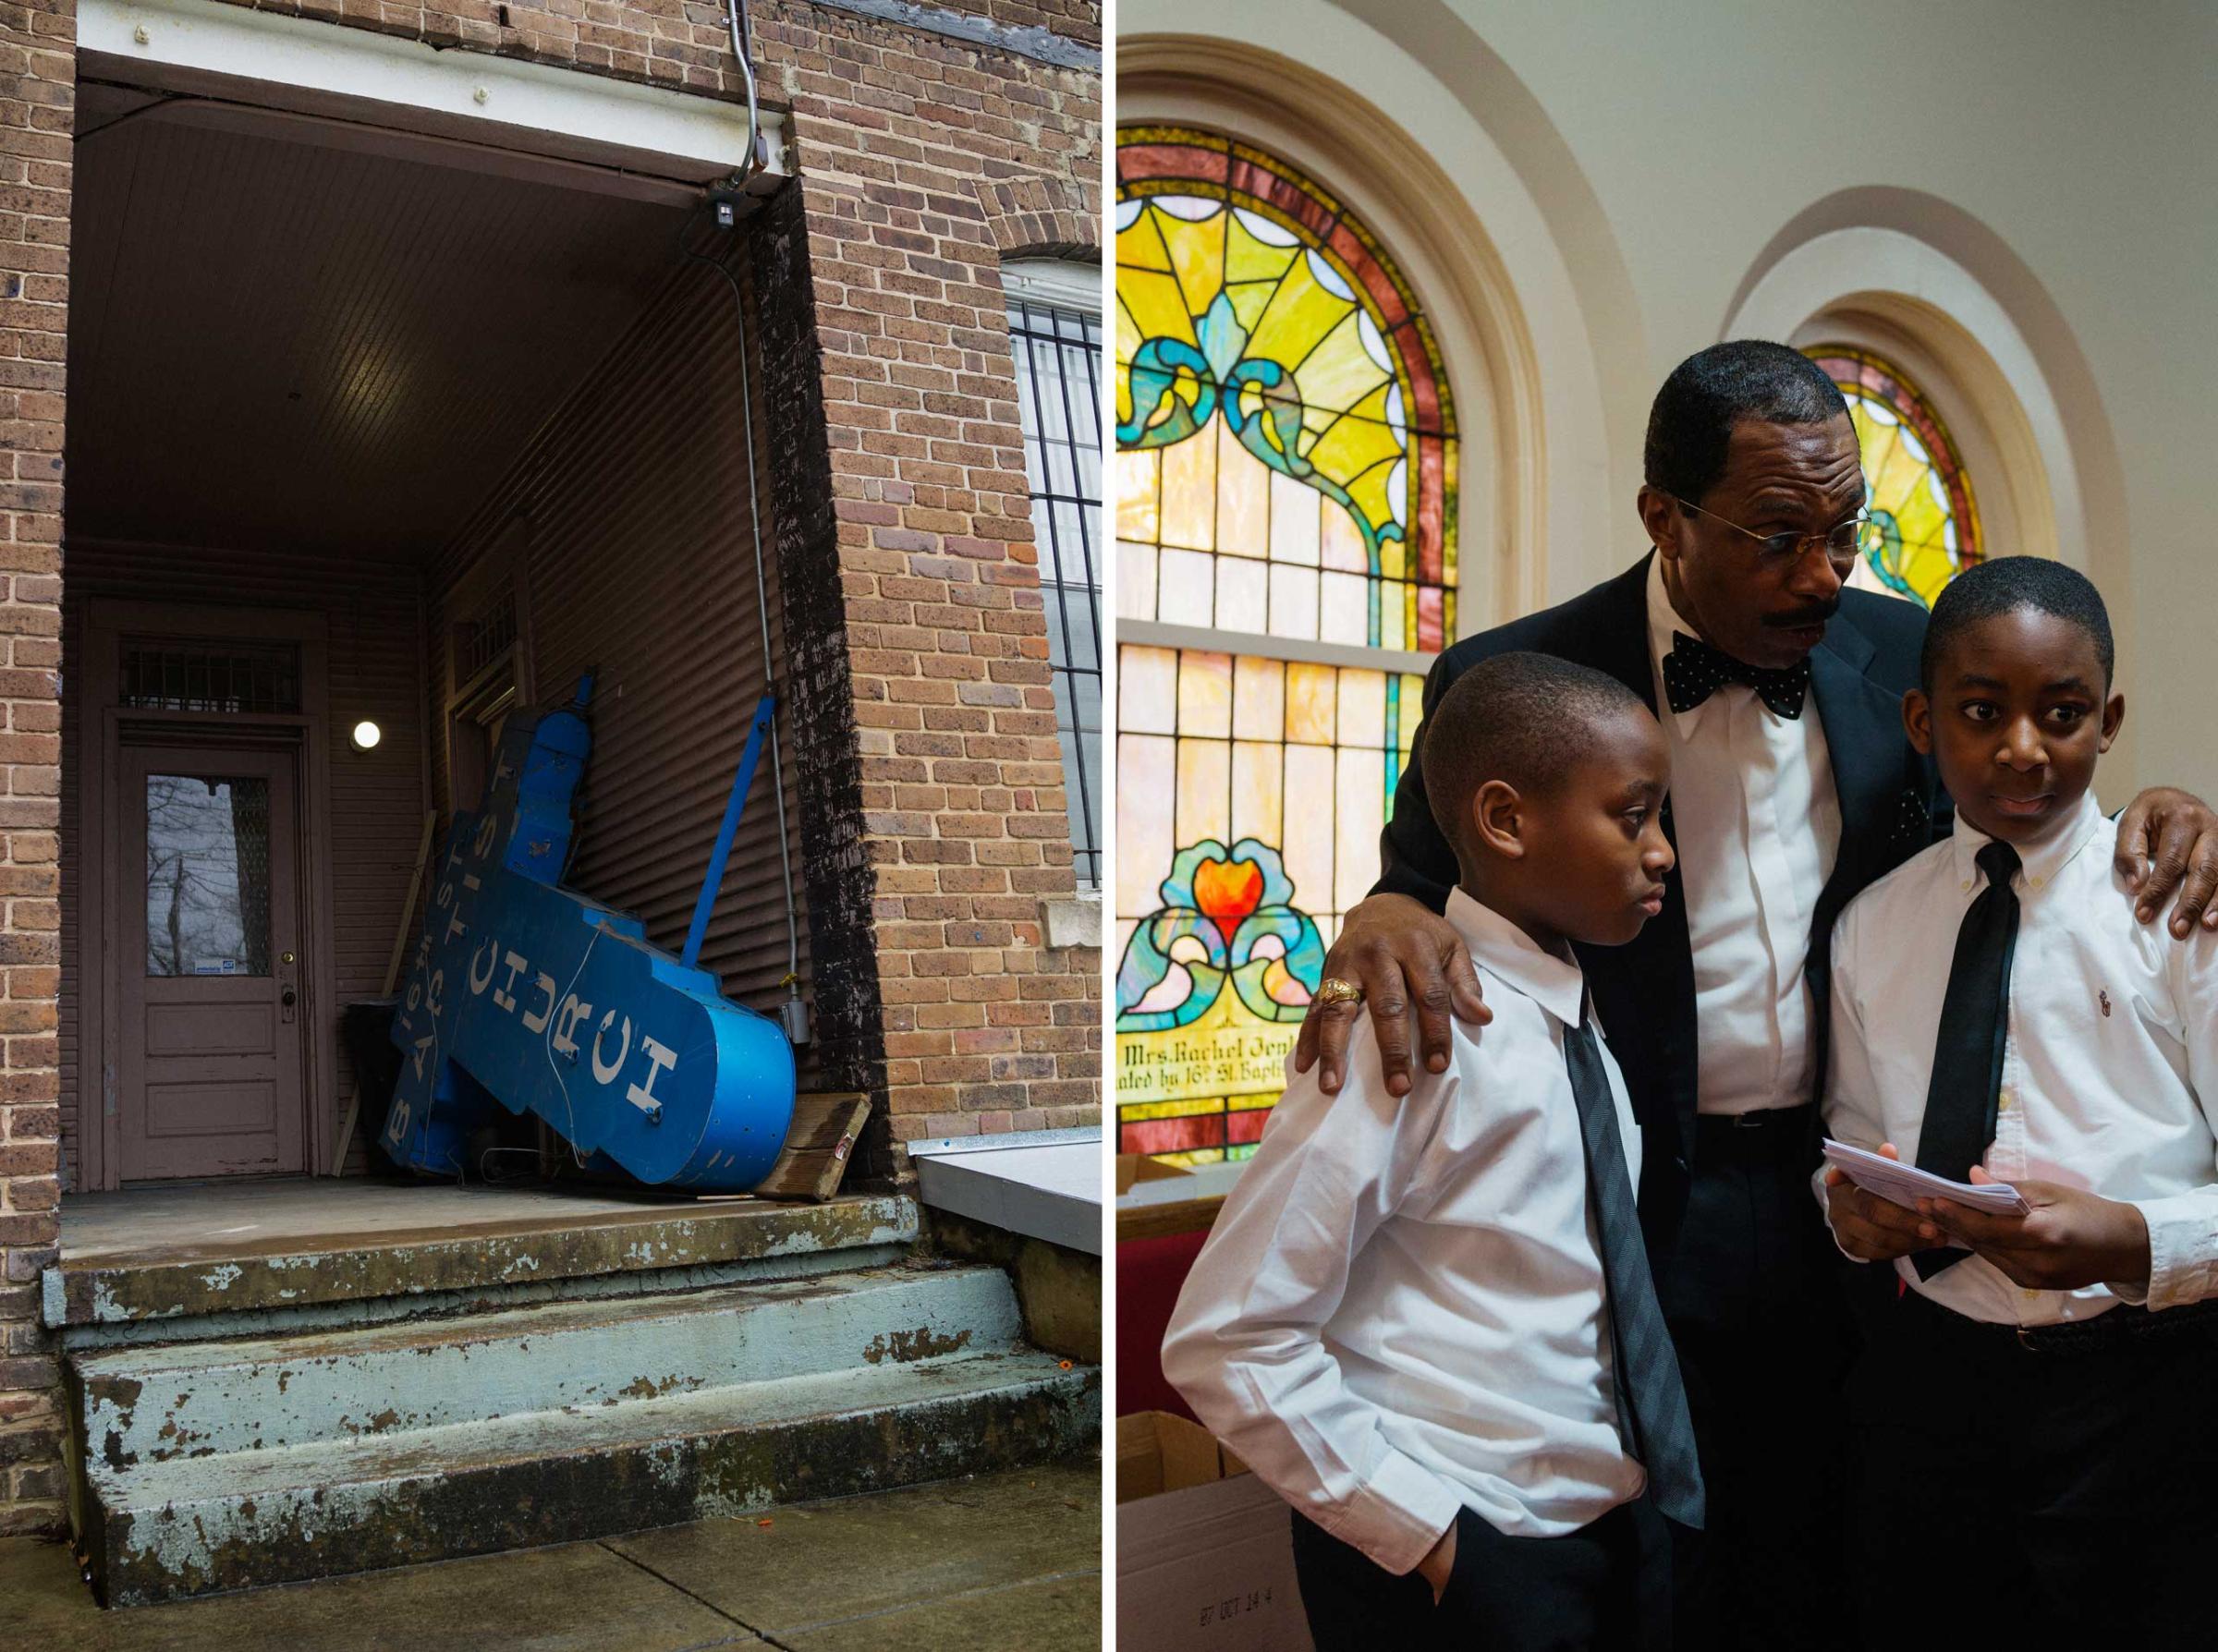 Left: The old sign from 16th Street Baptist Church in Birmingham, Ala. Right: A deacon gives instructions to two young greeters at 16th Street Baptist Church in Birmingham, Ala. on March 22, 2015.